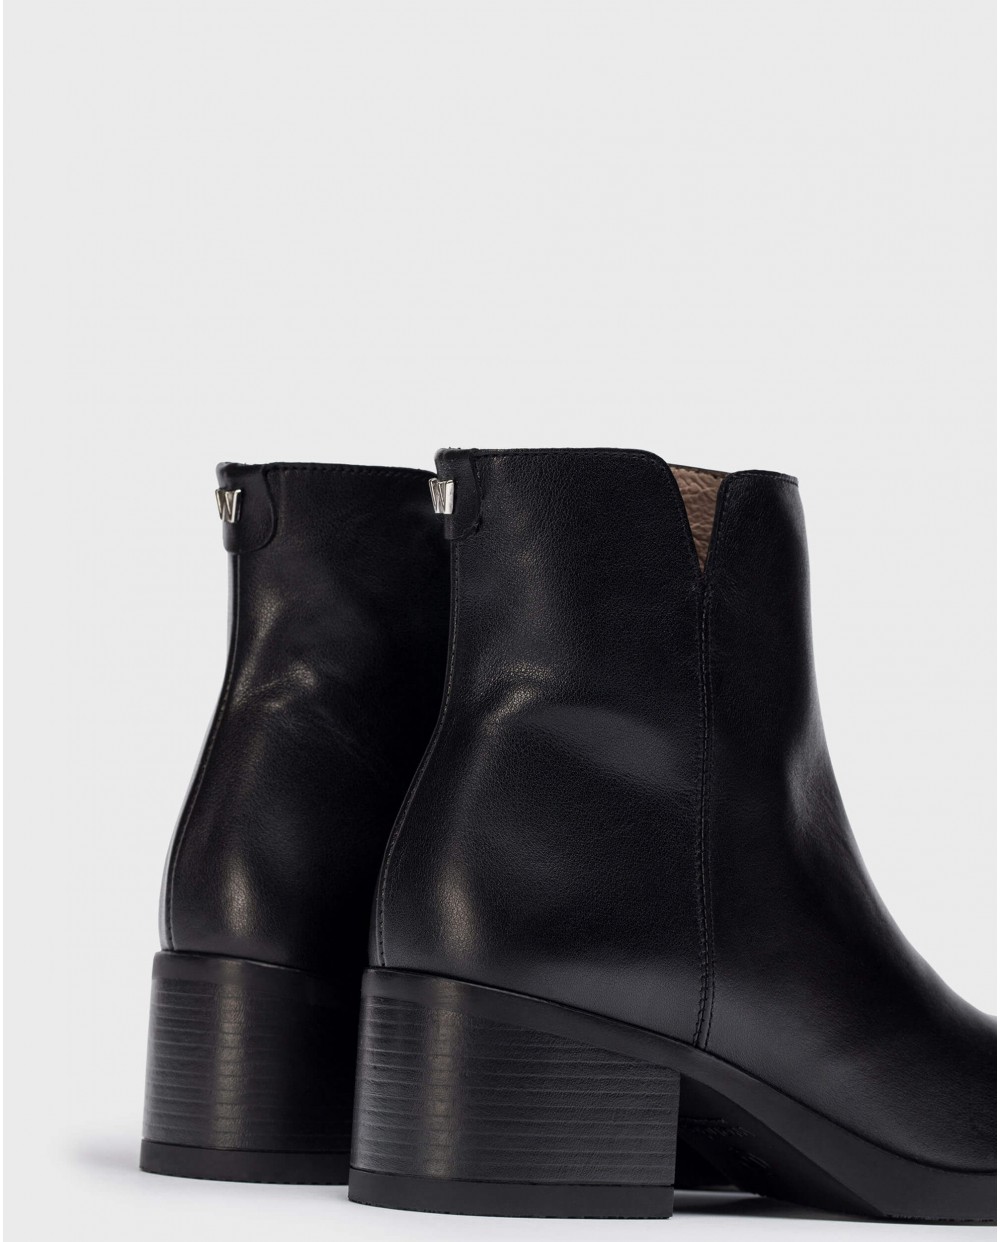 Wonders-Ankle Boots-Black KATE boots